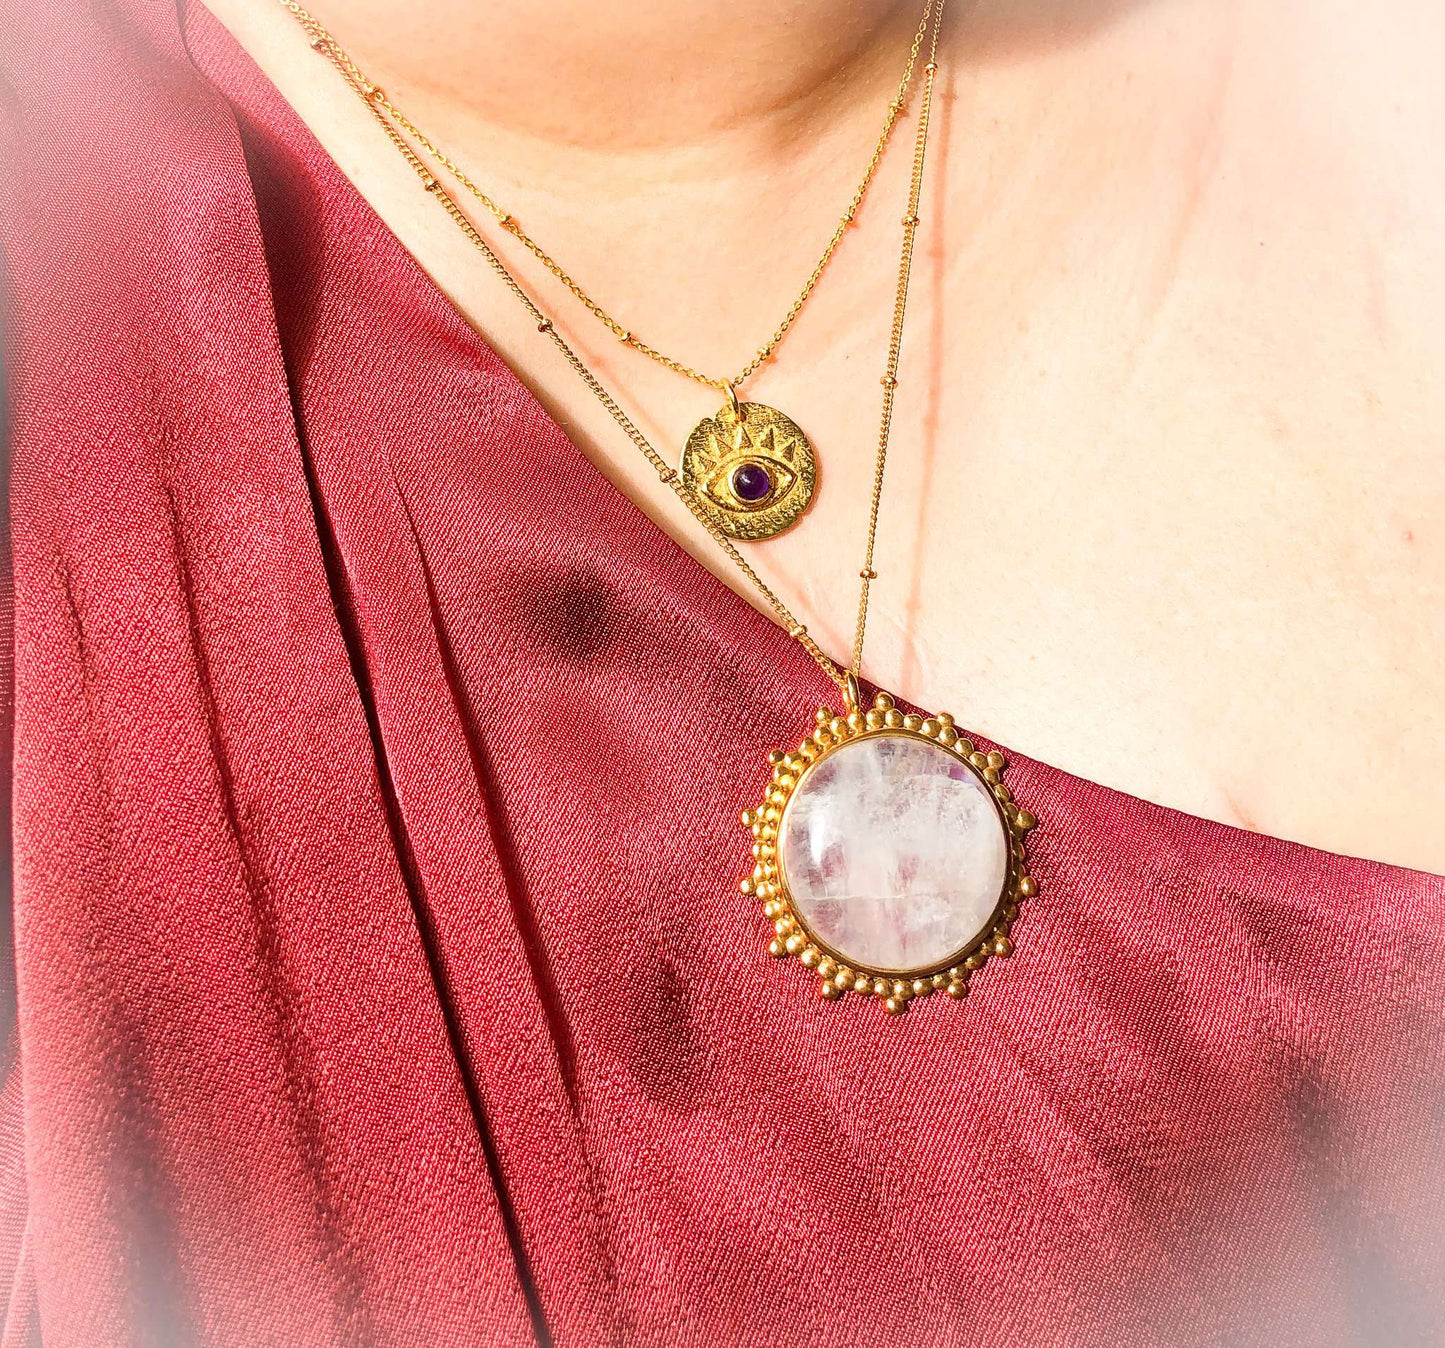 Evil eye pendant gold coloured with amethyst, worn with moonstone pendant on model